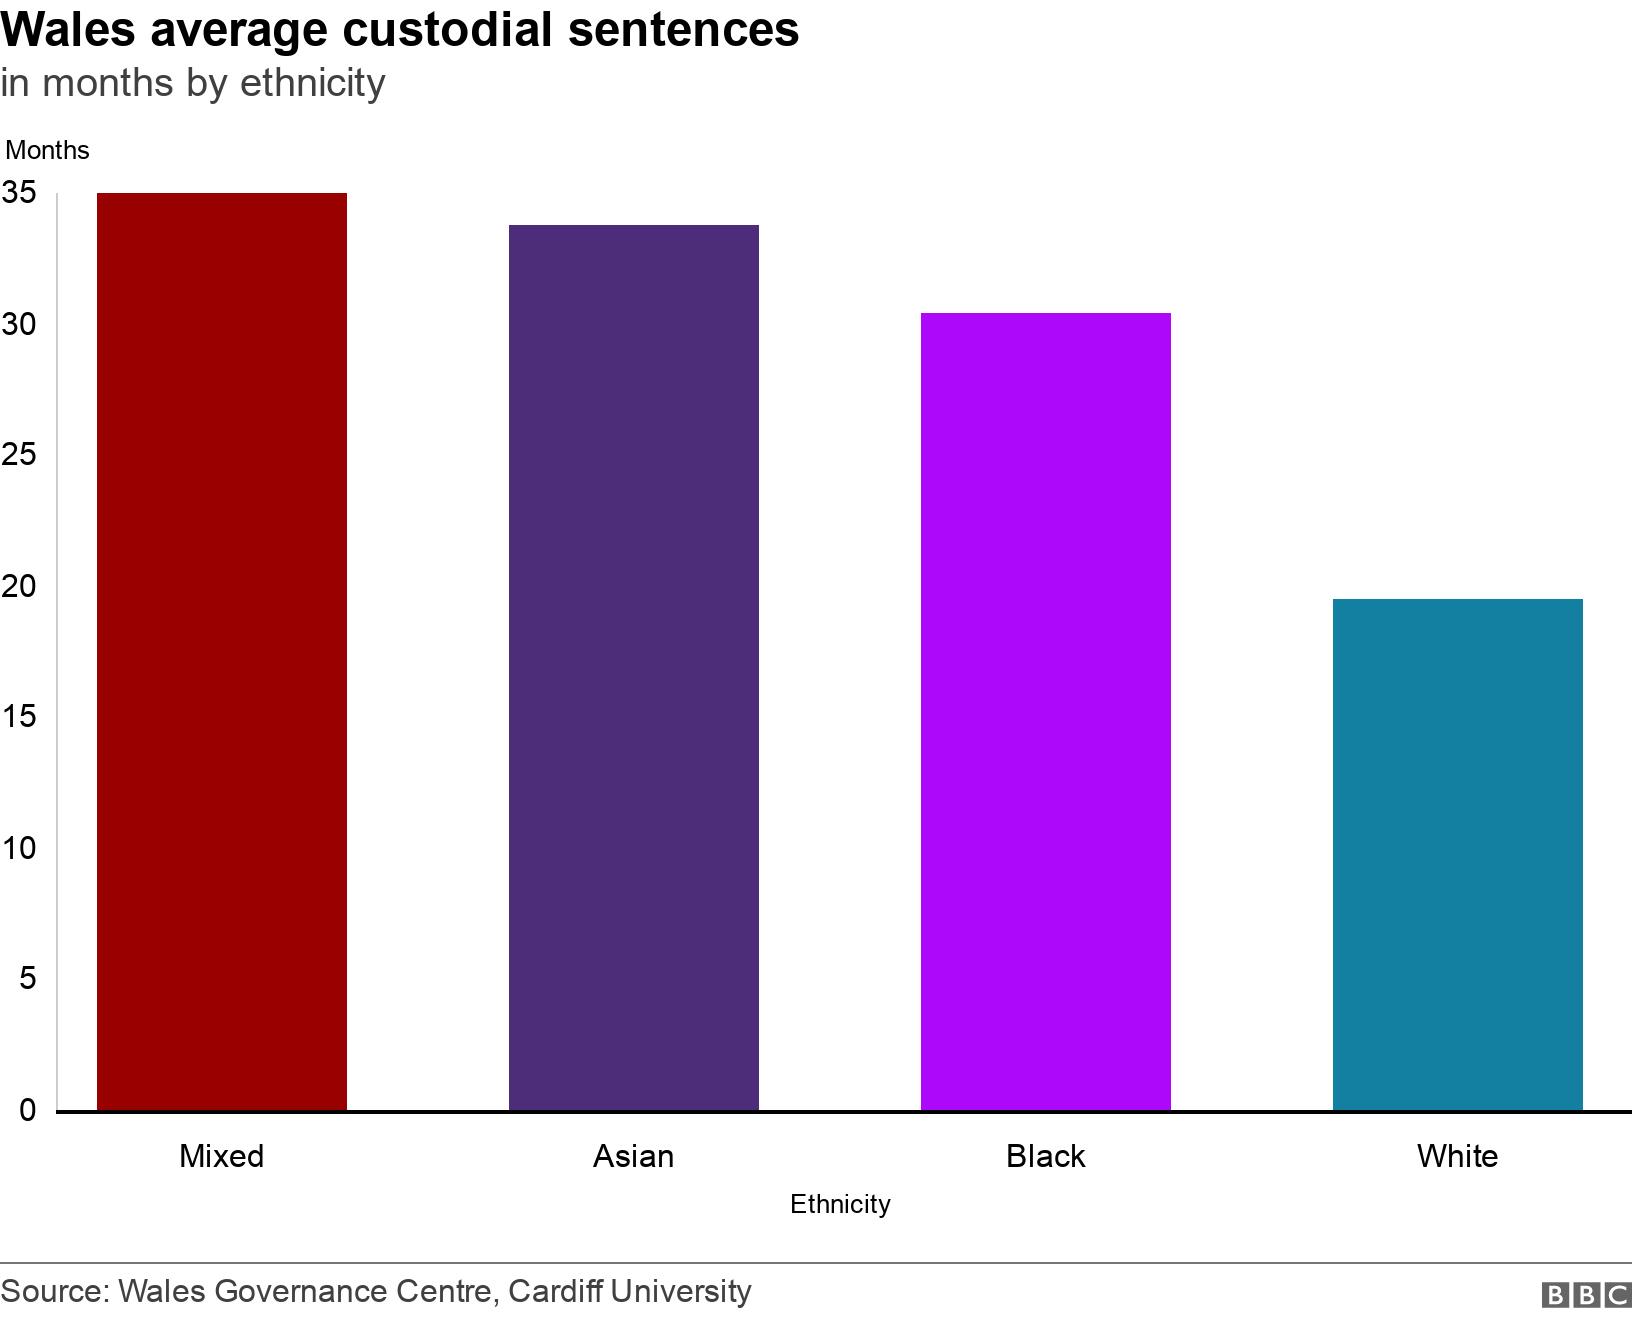 Wales average custodial sentences. in months by ethnicity. Average custodial sentences in months for different ethnicities in Wales .